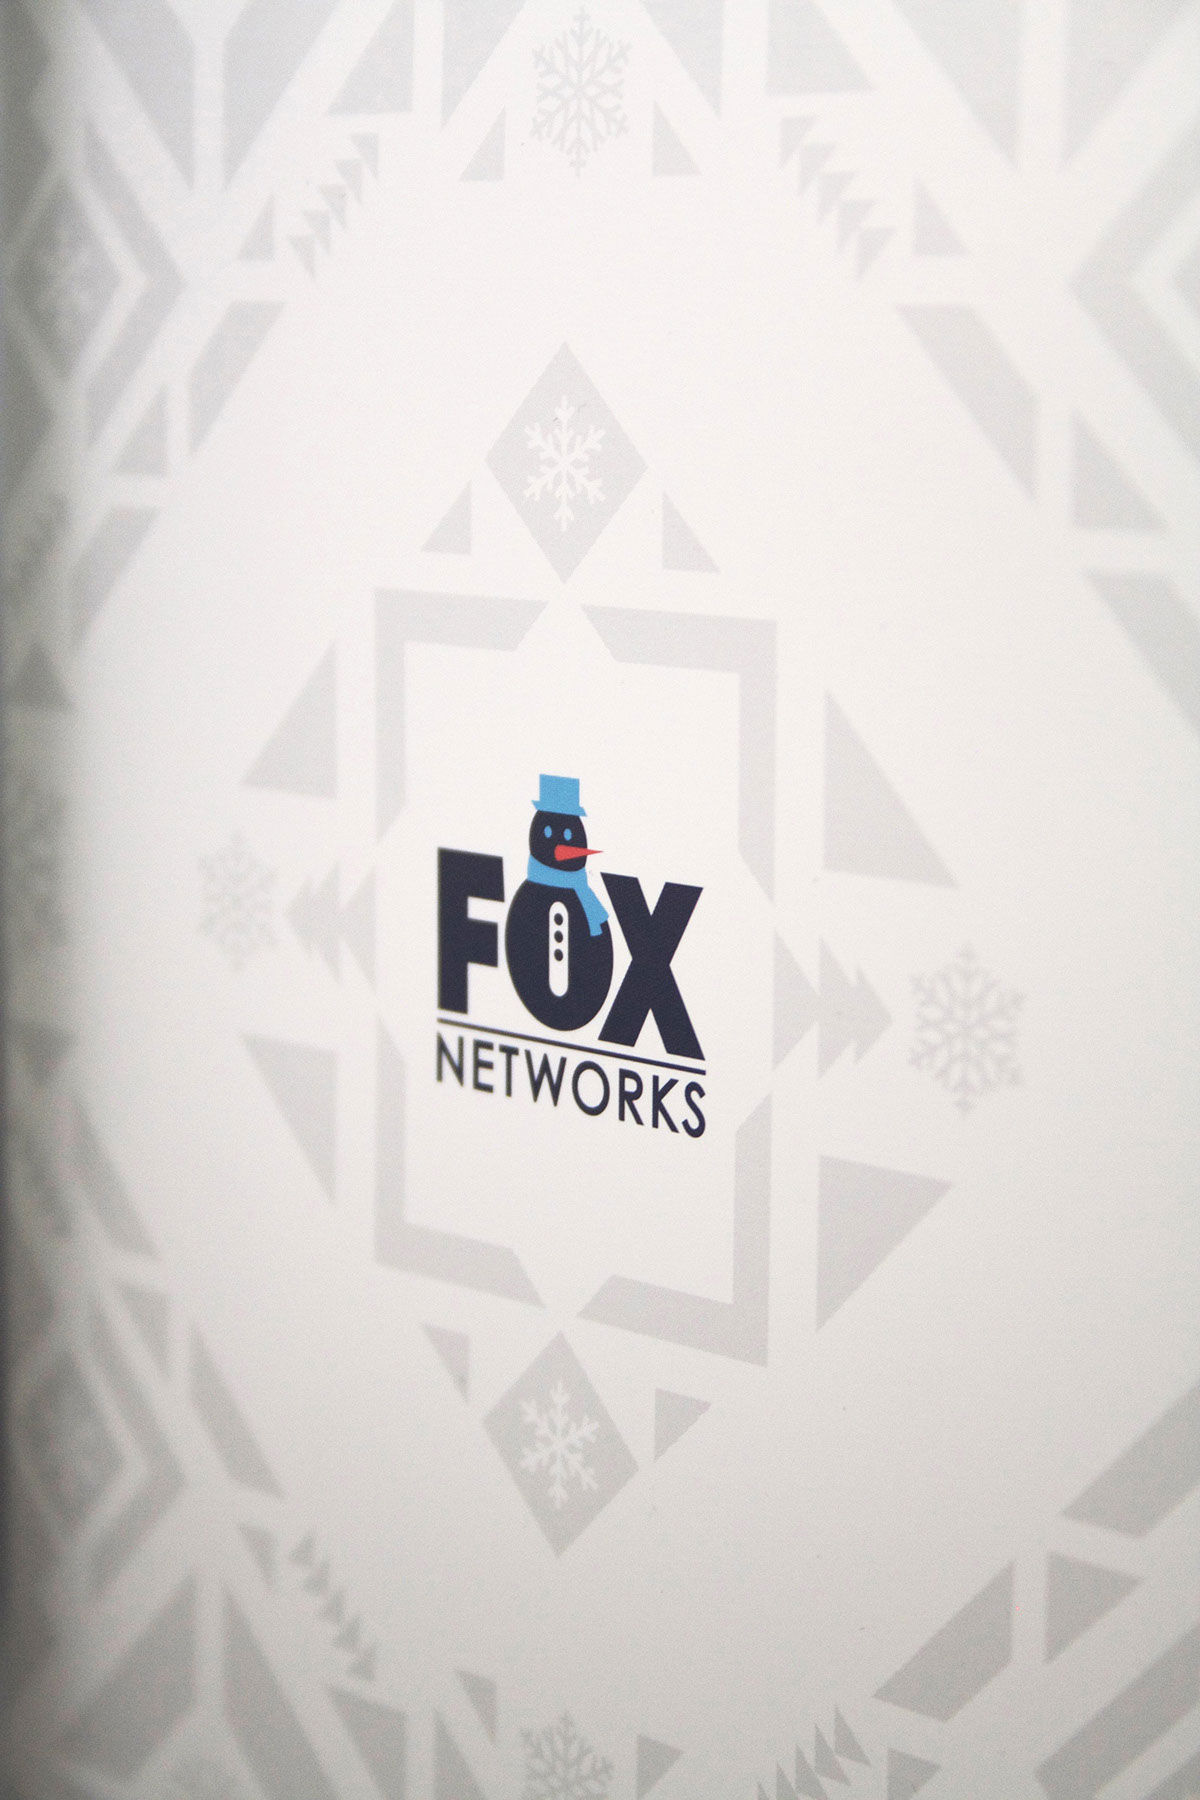 Foxnetworks FOX Holiday cards gifts